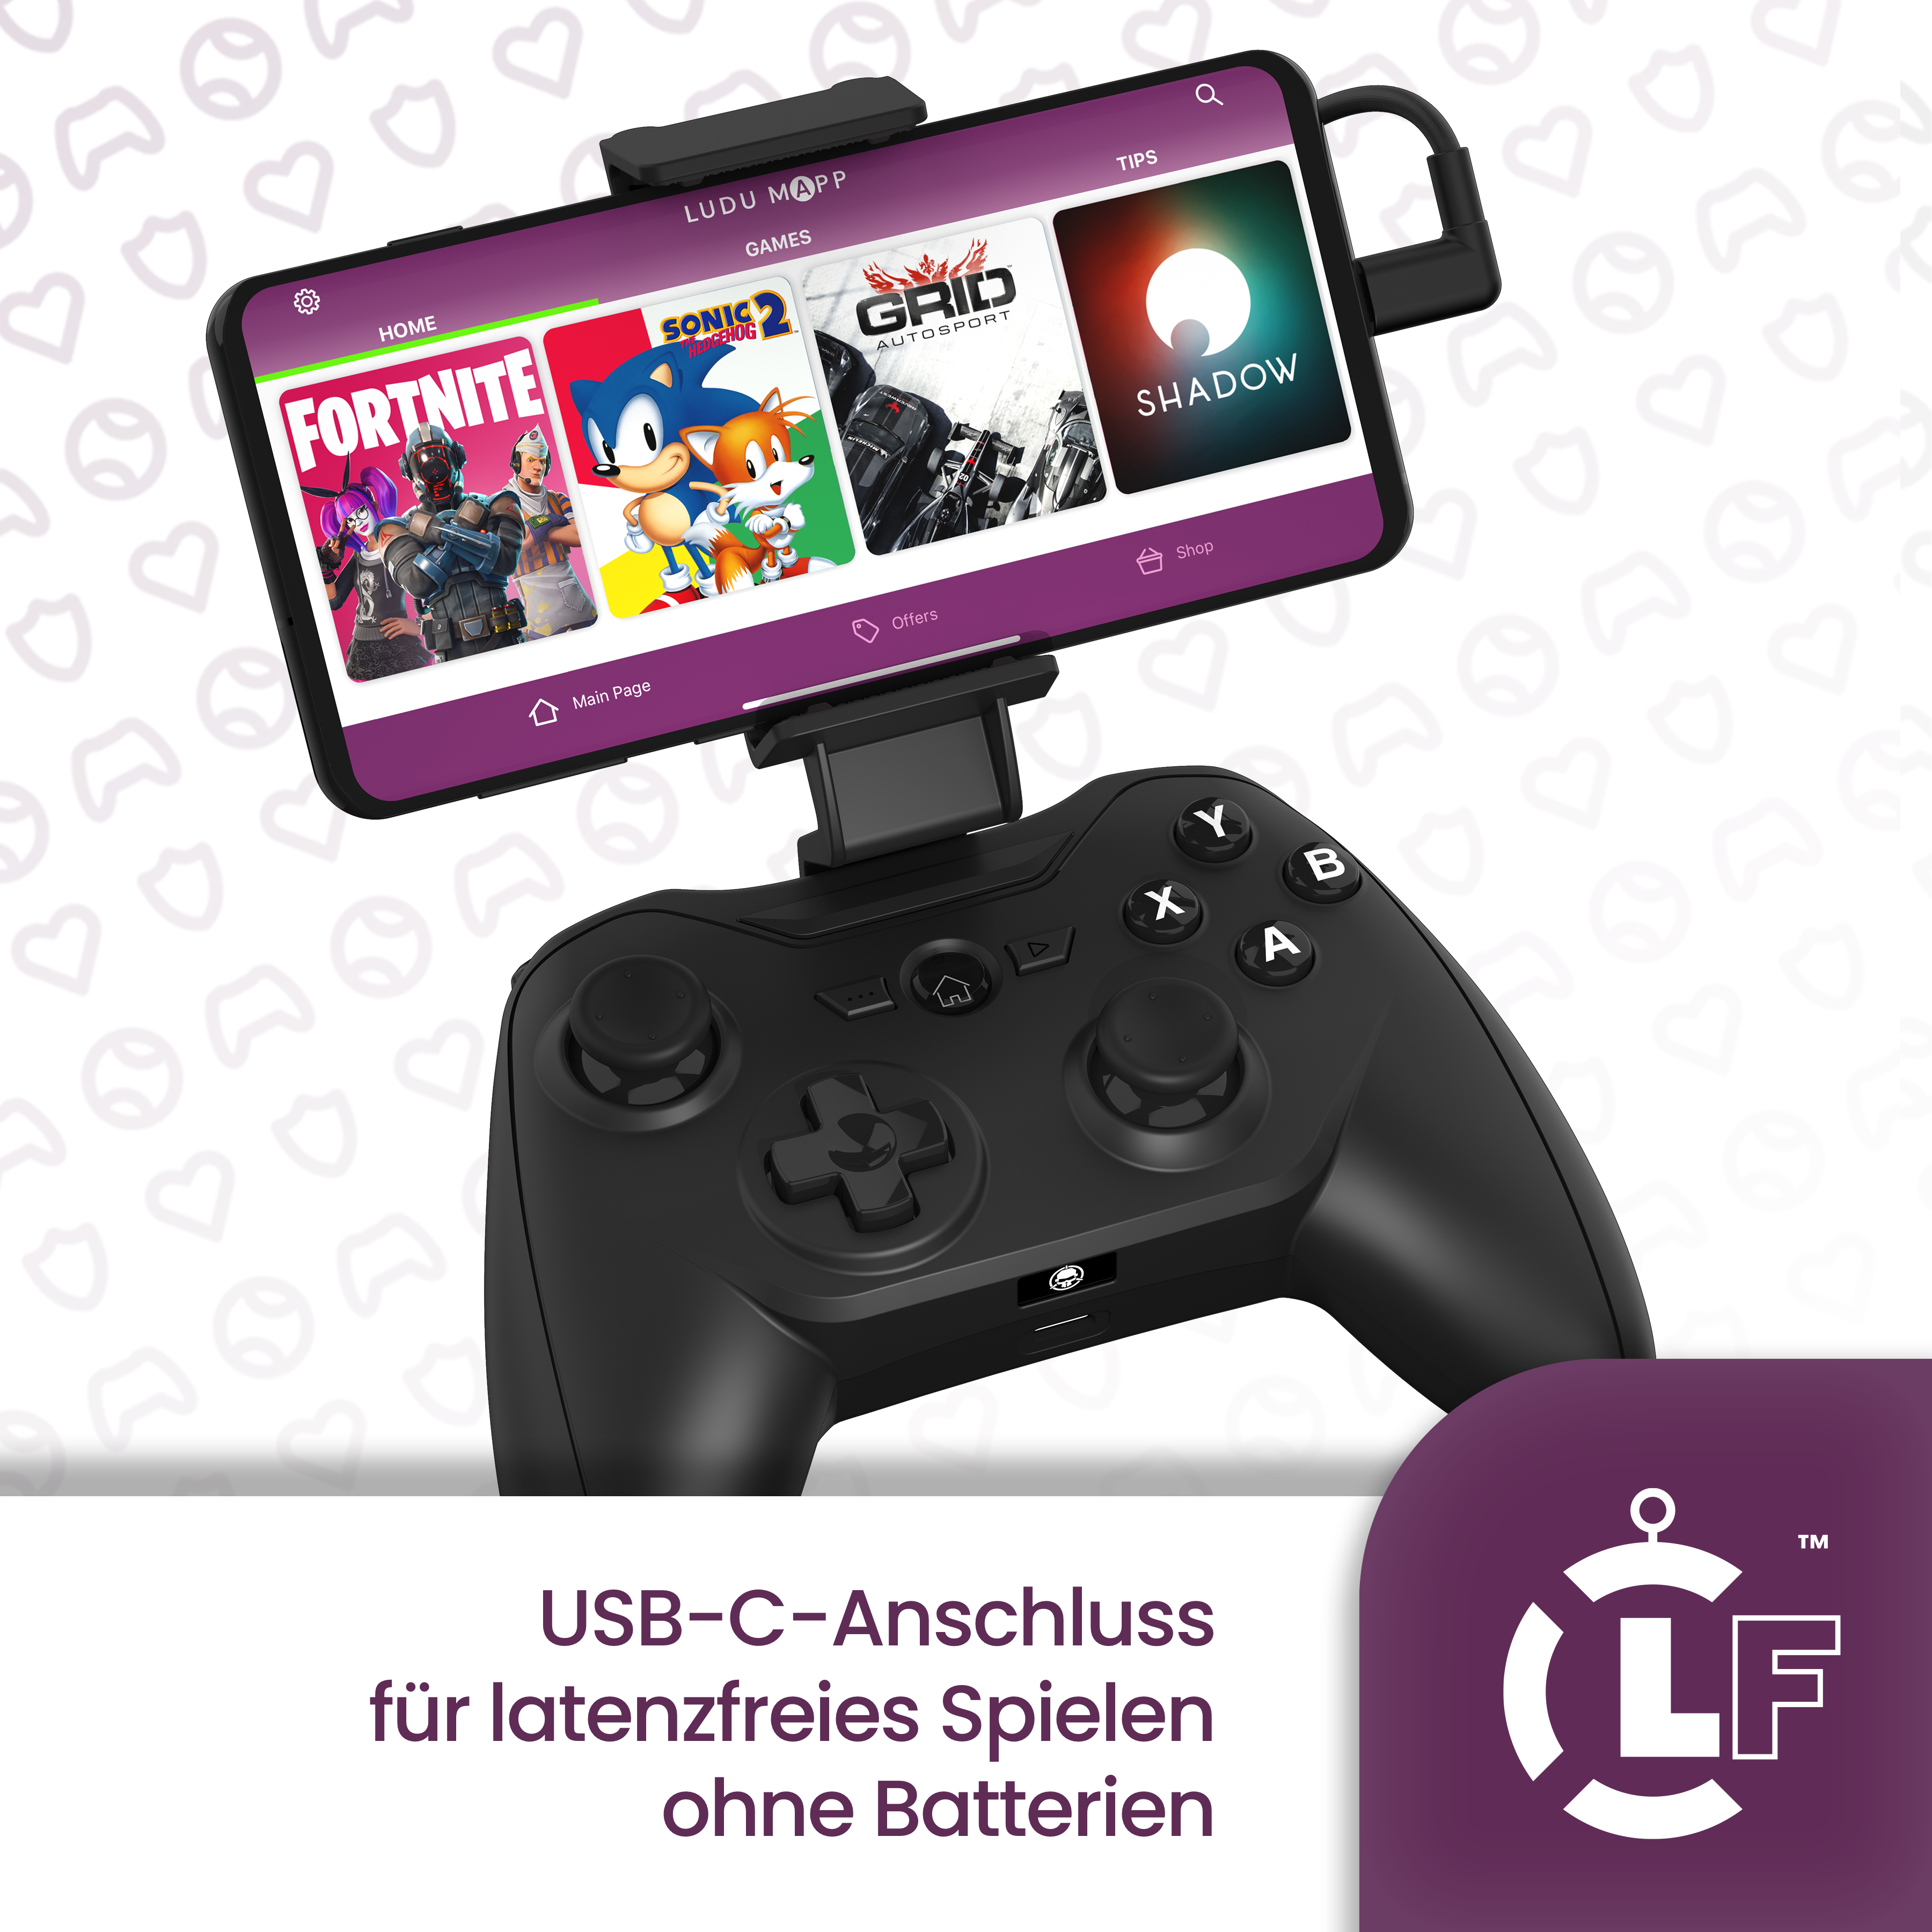 RIOTPWR Rotor Riot Android Controller Schwarz